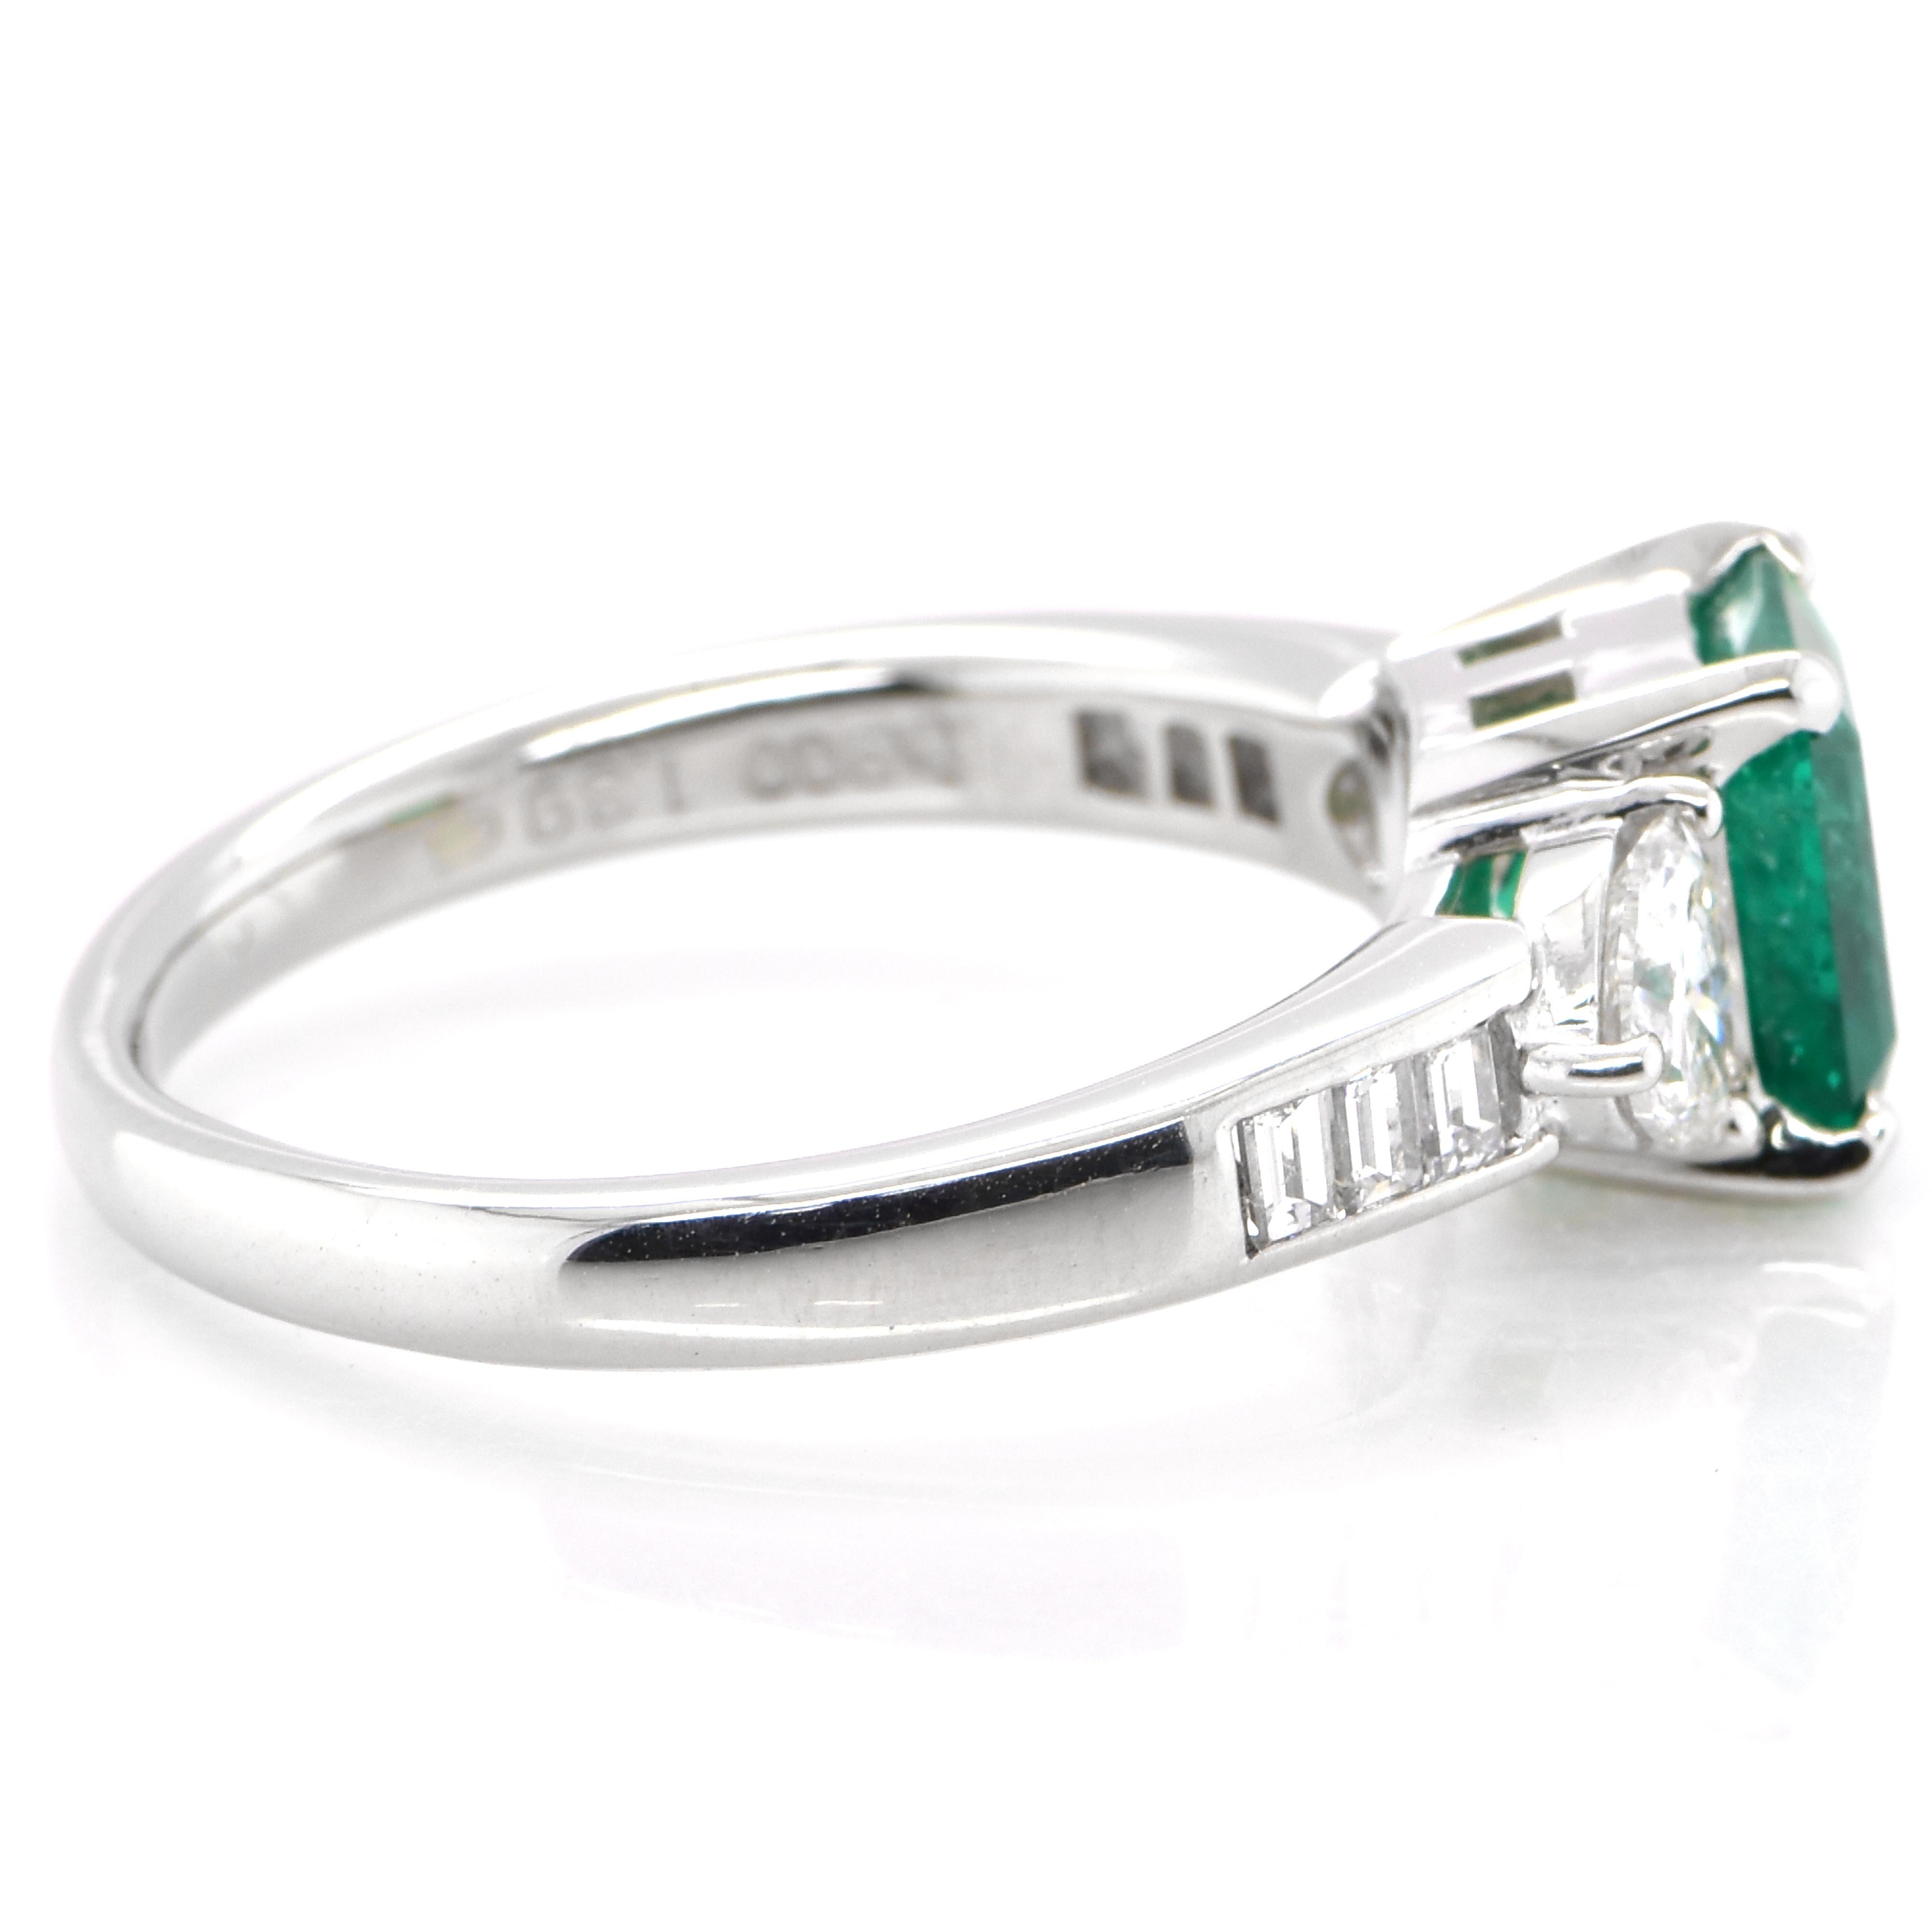 Modern 1.39 Carat Vivid Green, Colombian Emerald and Diamond Ring Set in Platinum For Sale